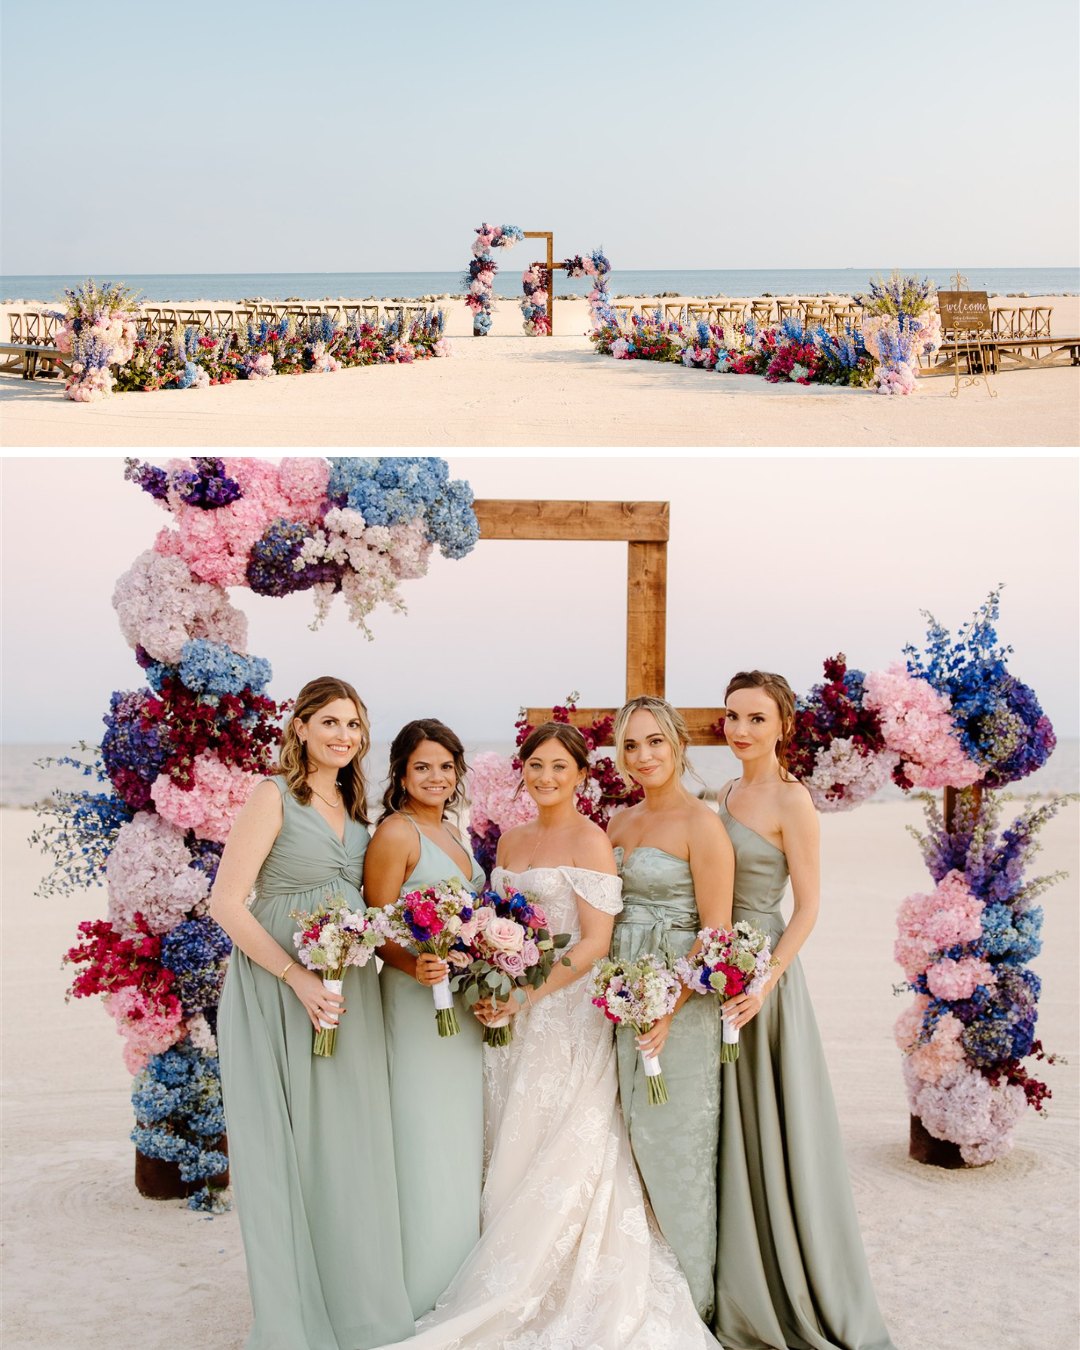 Top photo: beachside ceremony in the Florida Keys. Bottom photo: A bride at her wedding on the beach with her bridesmaids.